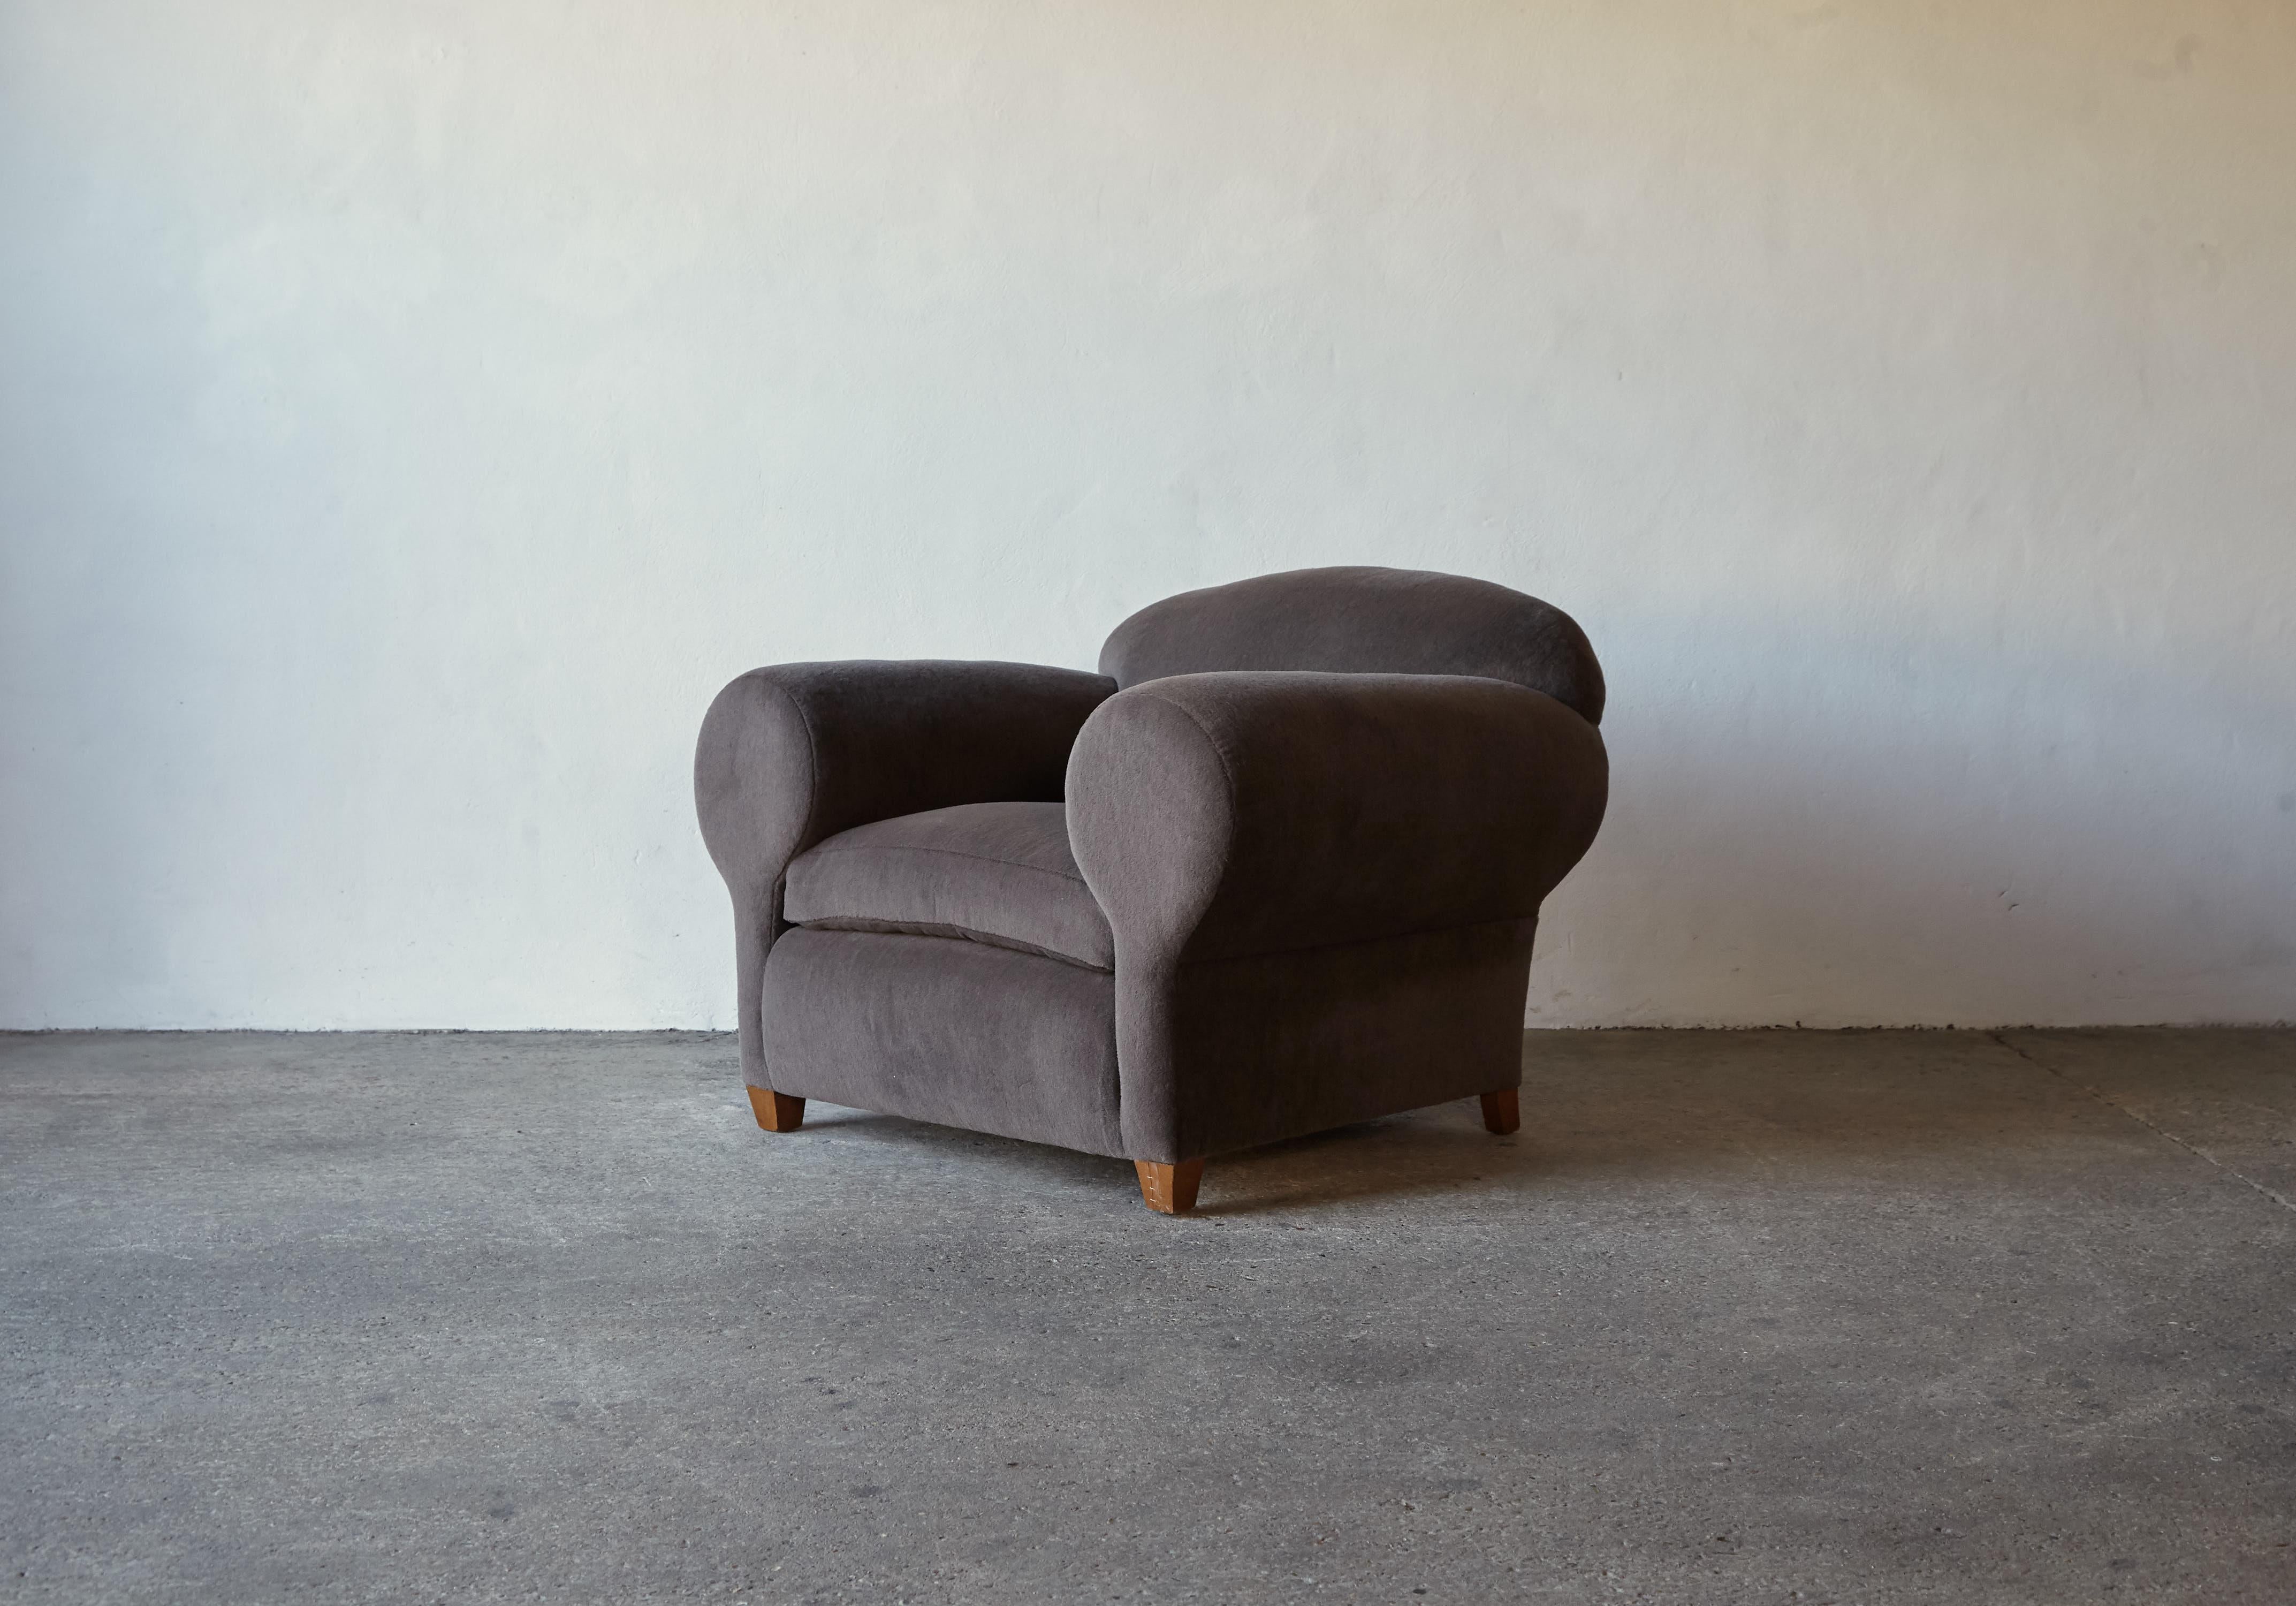 A superb rare 1940s / 1950s oversized club chair reminiscent of Maison Gouffe / Jean Royere. Newly upholstered in a premium, soft, dark grey (with a hint of brown) pure alpaca fabric. Fast shipping worldwide.
  
